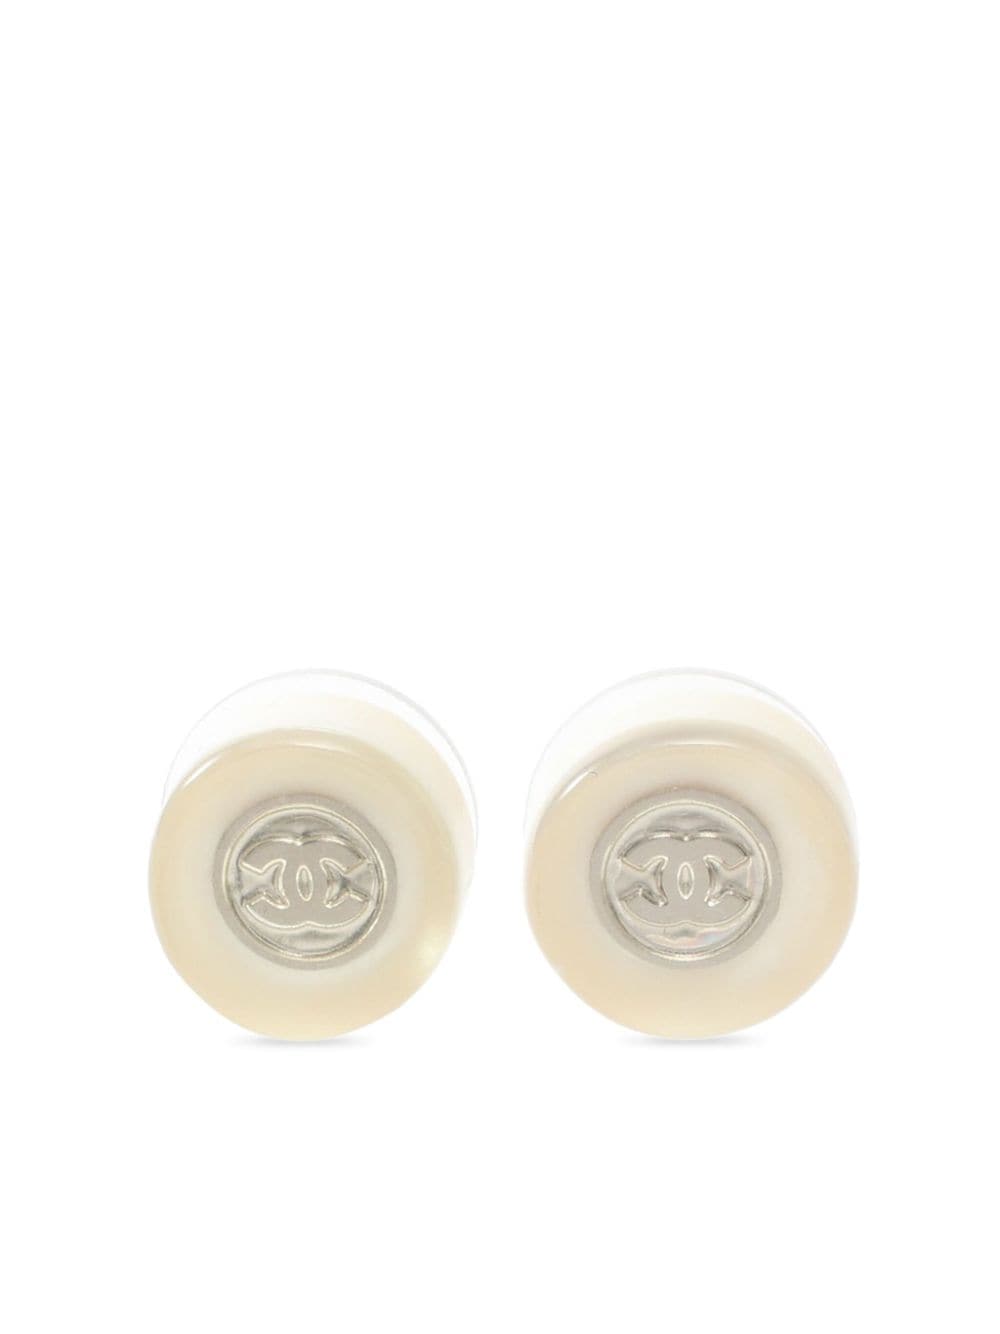 Pre-owned Chanel 1986-1988 Cc Button Earrings In White